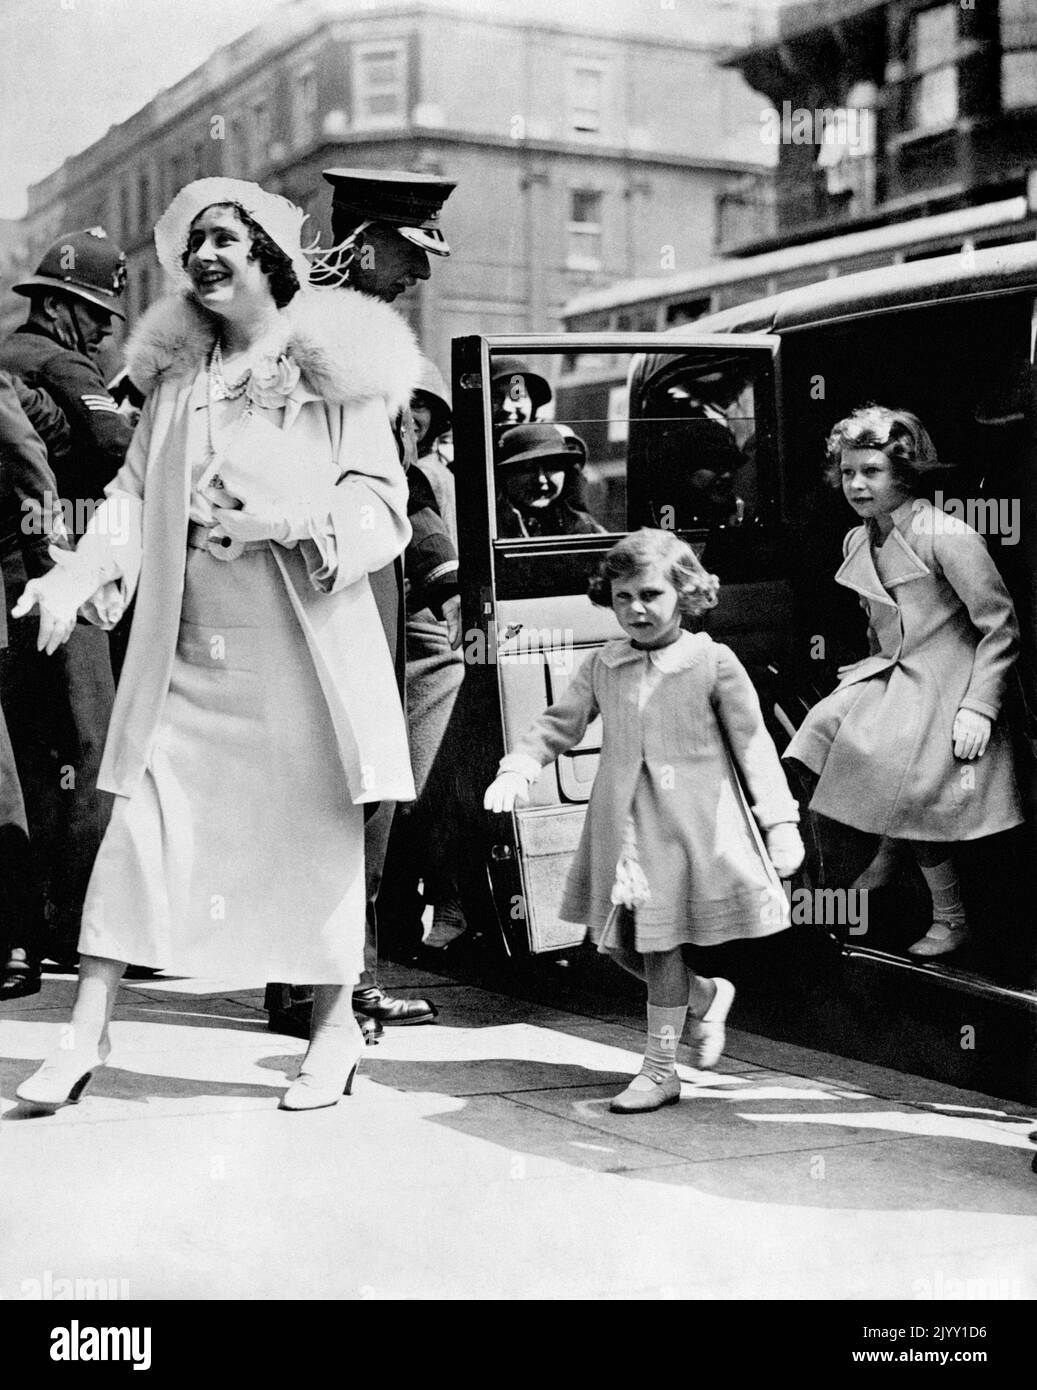 File photo dated 15/8/1935 of Princess Elizabeth (right - later Queen Elizabeth II), her sister, Princess Margaret, and her mother, The Duchess of York (later Queen Elizabeth and the Queen Mother). The Queen pledged at the age of 21 that she would serve as monarch for her entire life. Issue date: Thursday September 8, 2022. Stock Photo